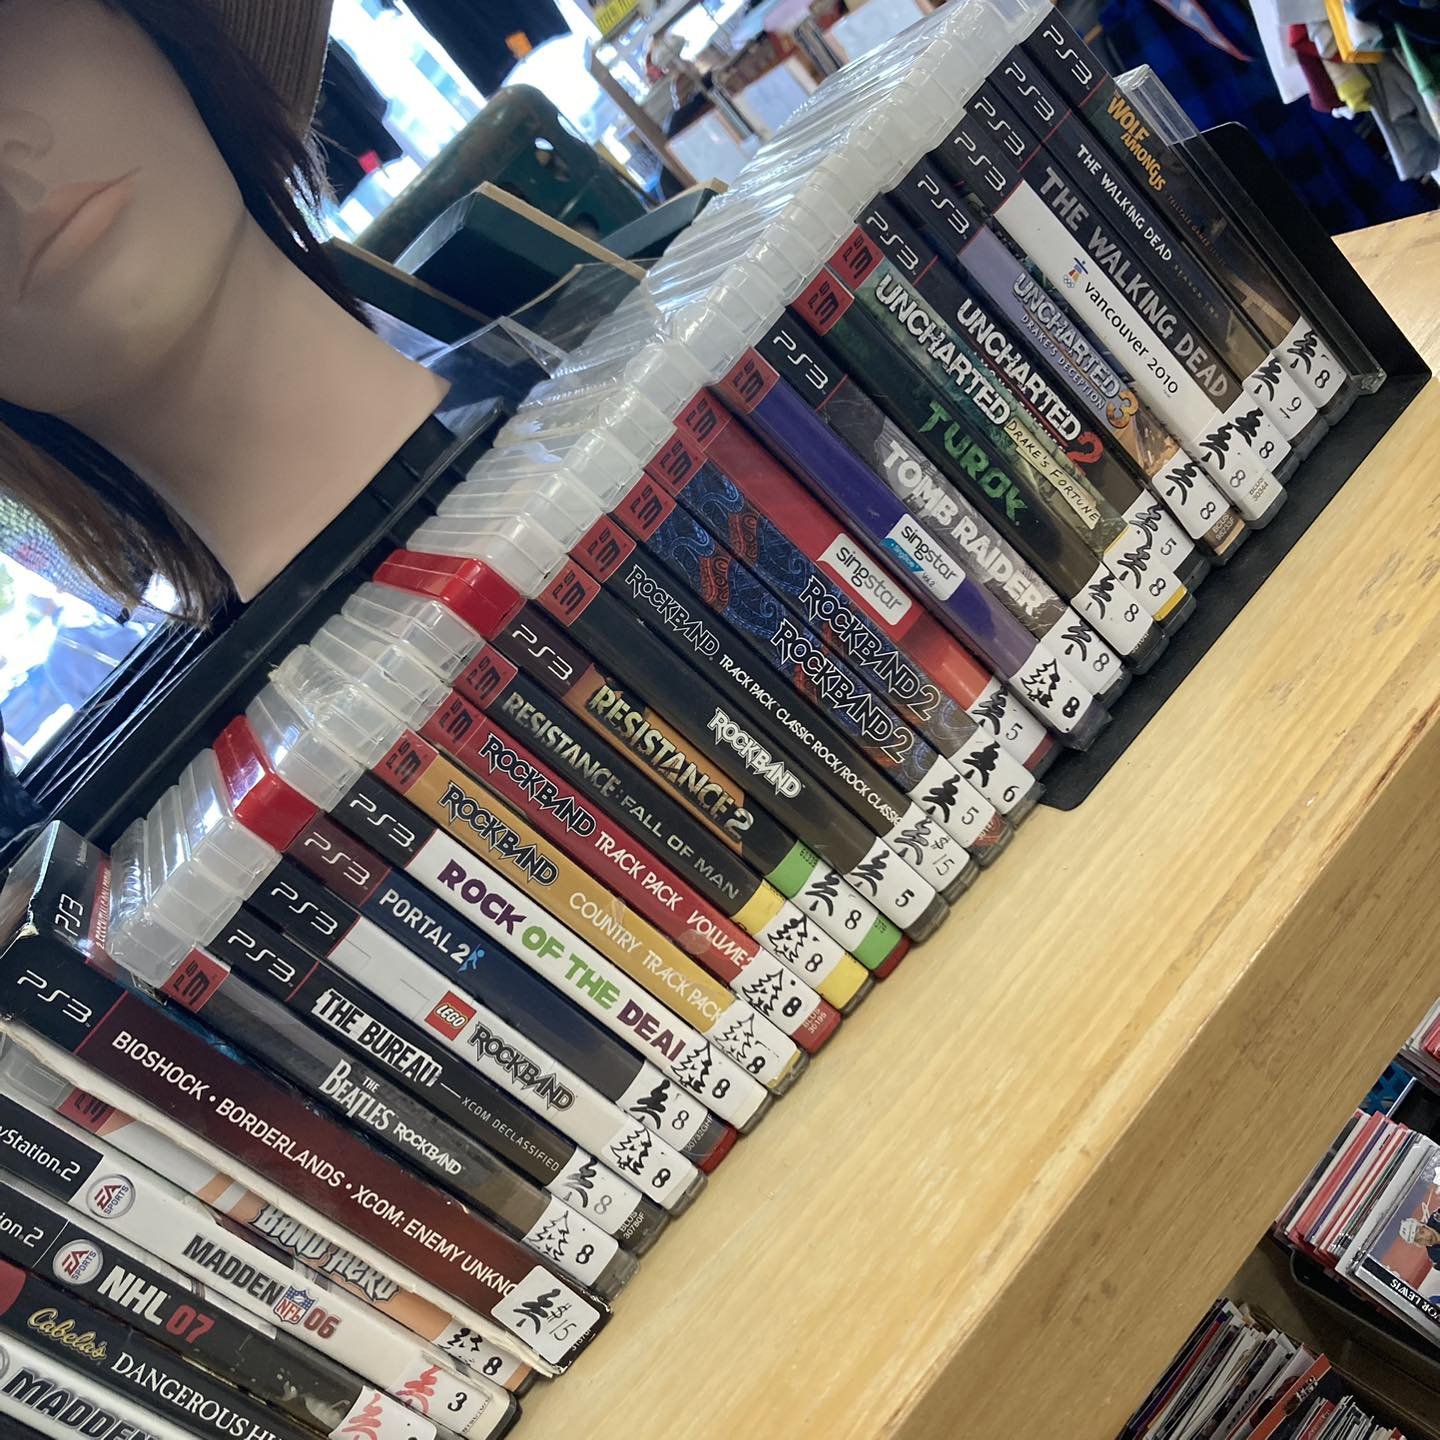 Added more than a few ps3 games to the selection today. A lot of Rock Band titles.

More to go out soon as well

🌲

#secondhand #thrift #thriftshopfinds #thriftshop #thriftstore #shoplocal #ShopSmall #niagarafalls